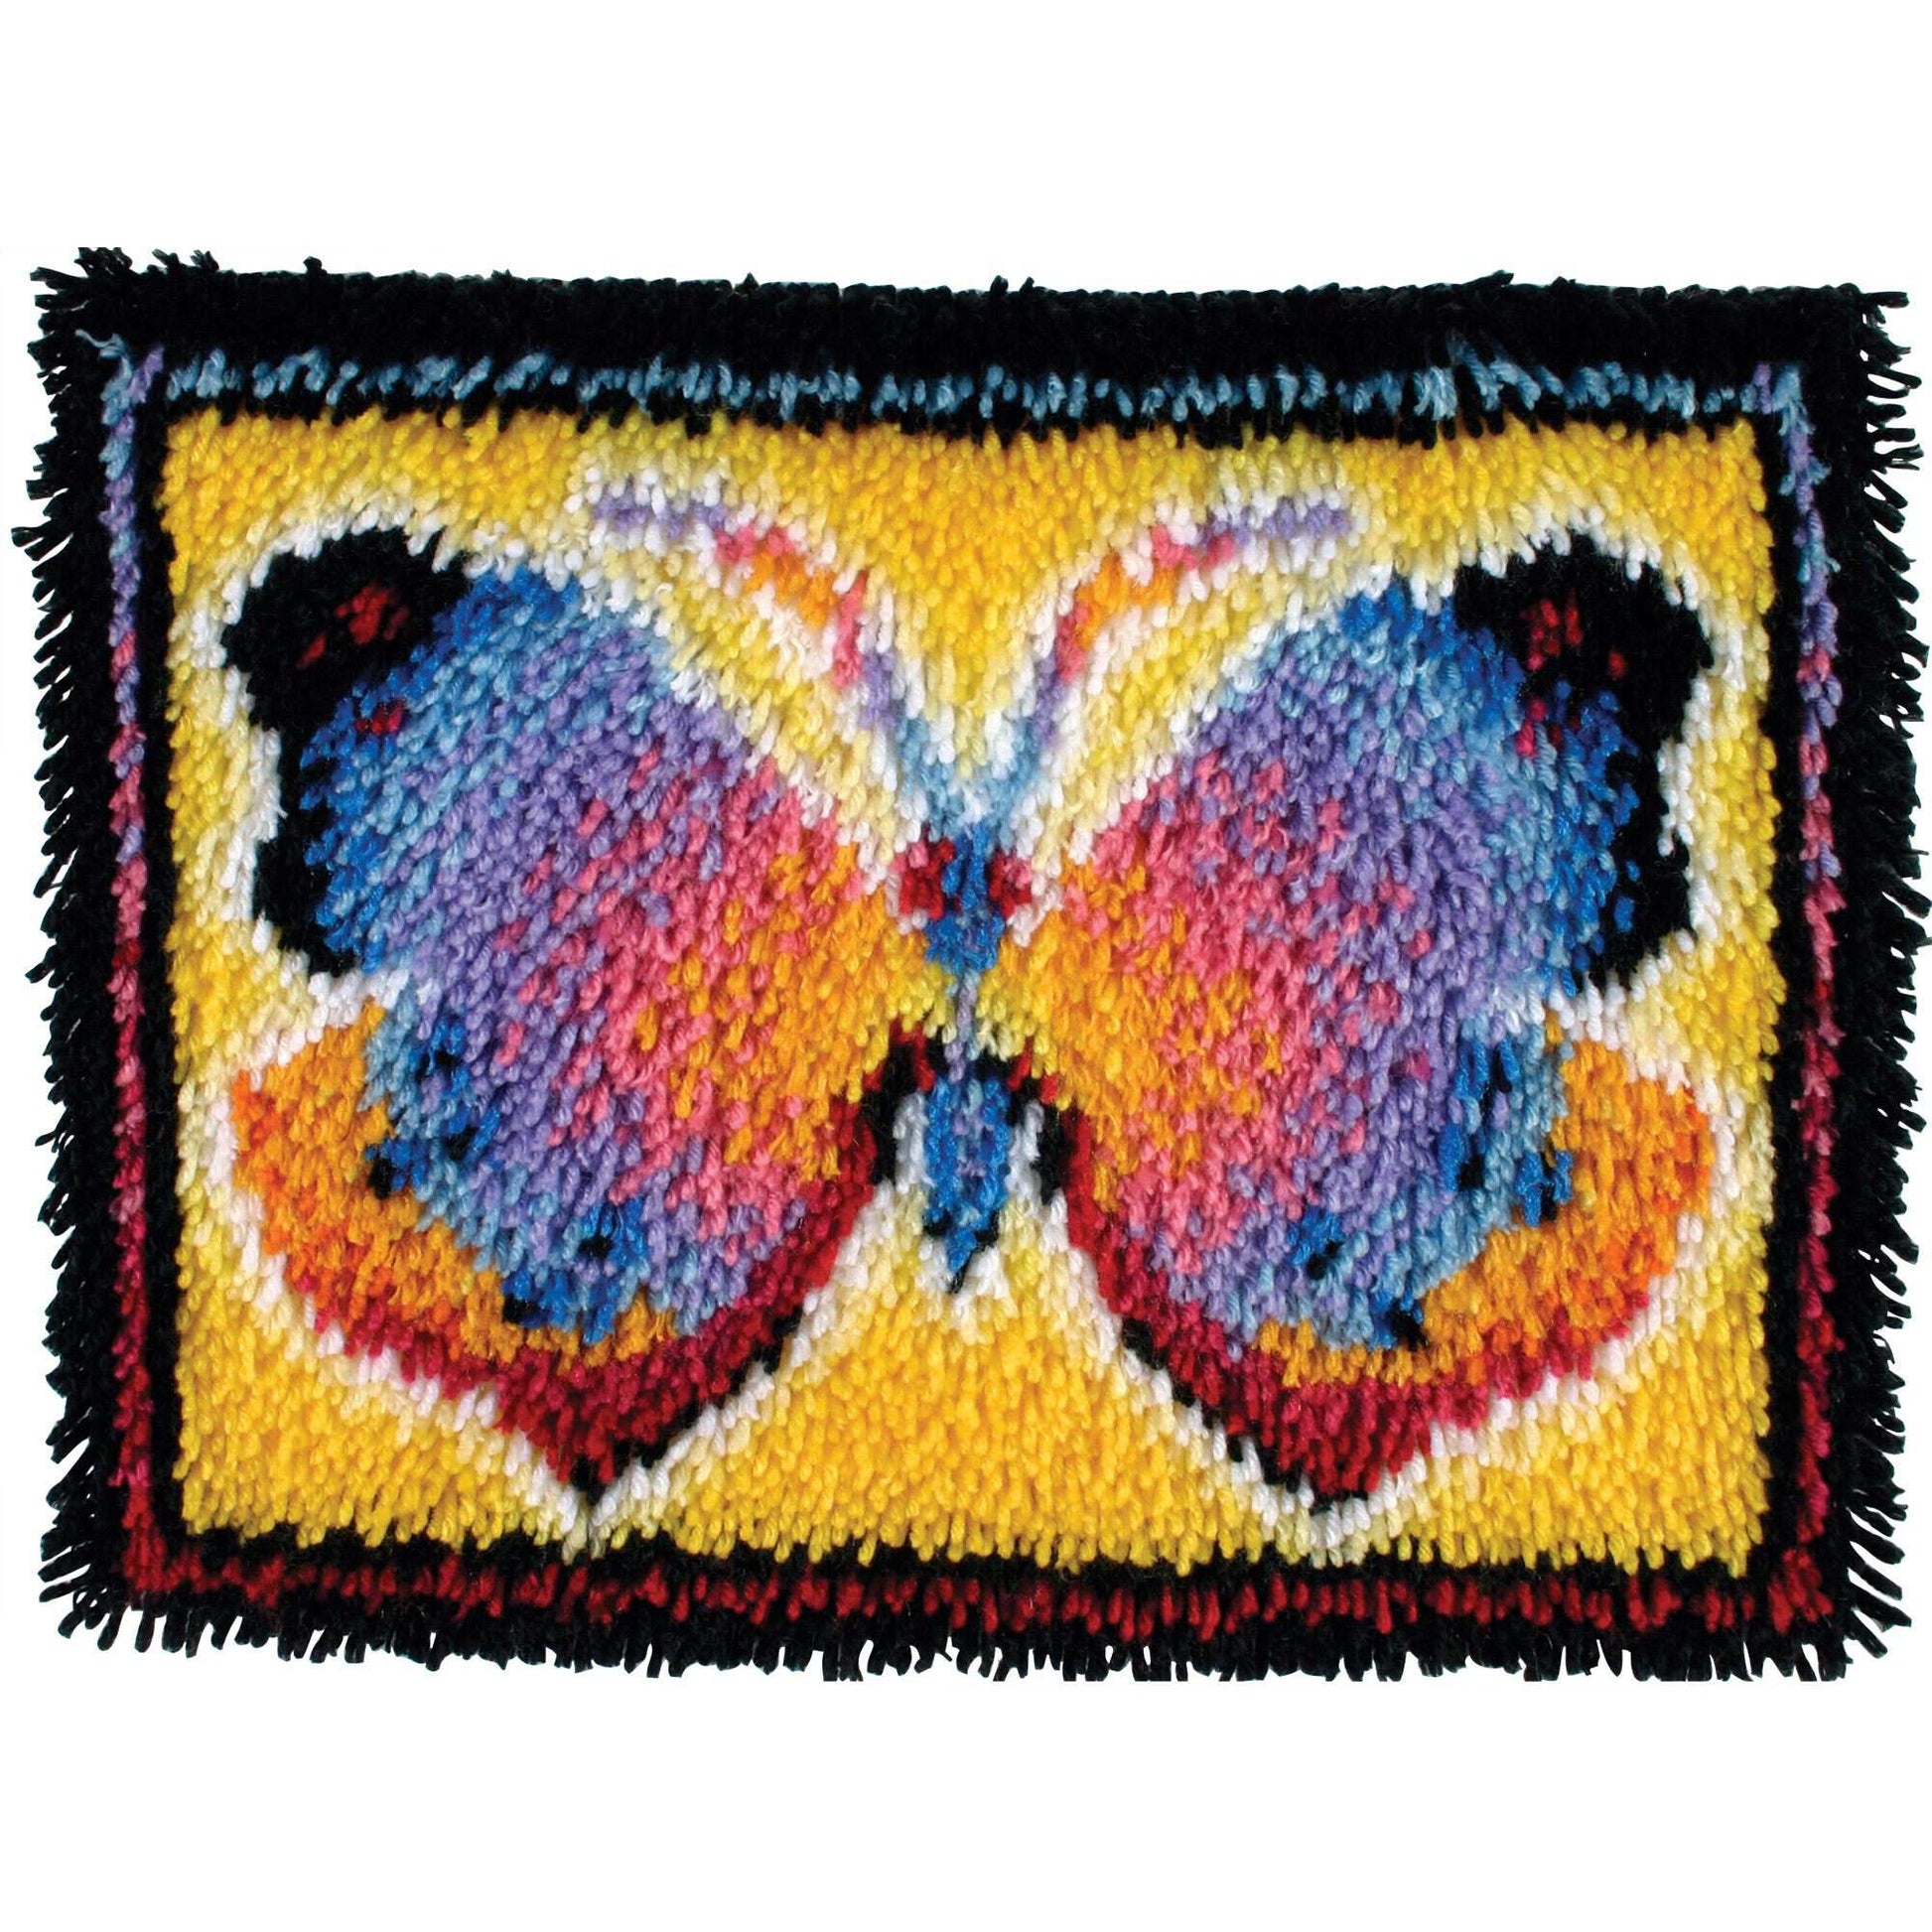 WonderArt Butterfly Fantasy Kit 15" x 20", Discontinued items